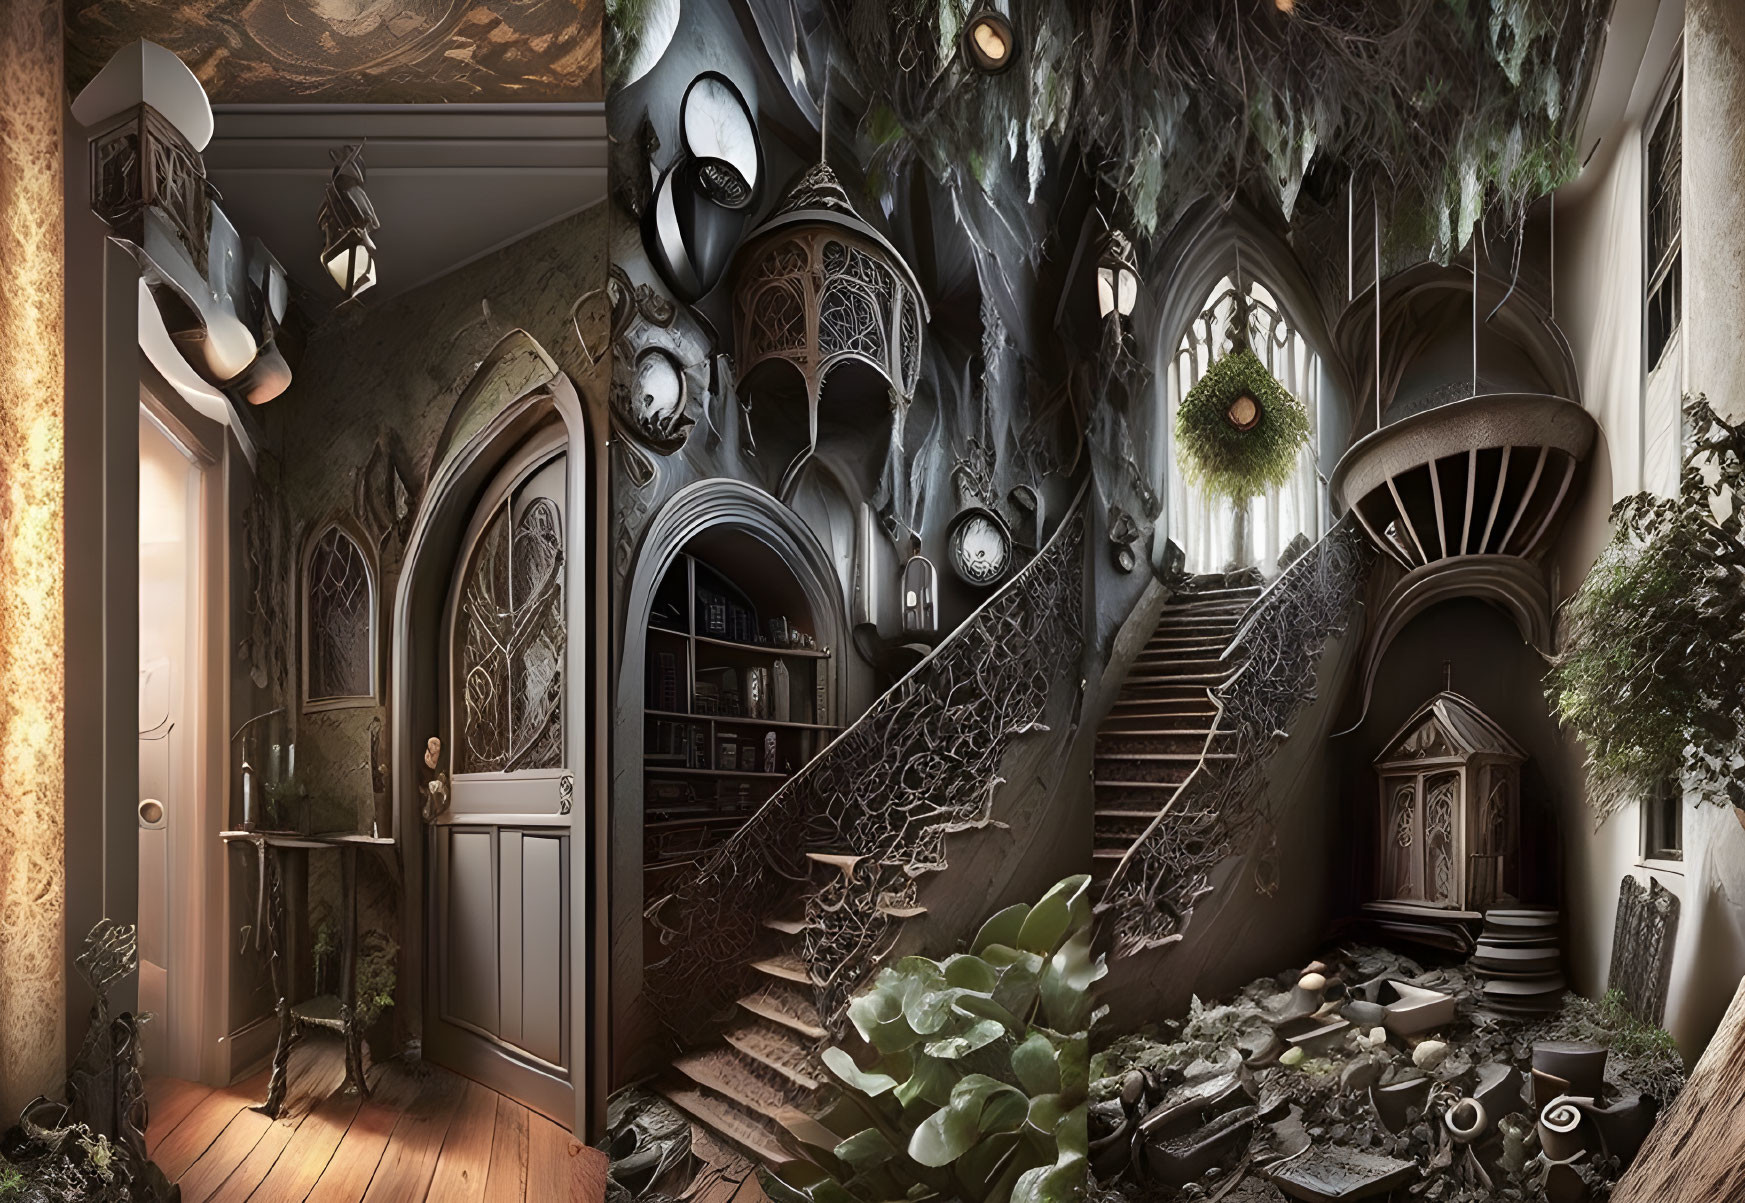 Gothic interior with grand staircase, arches, greenery, clocks, artifacts